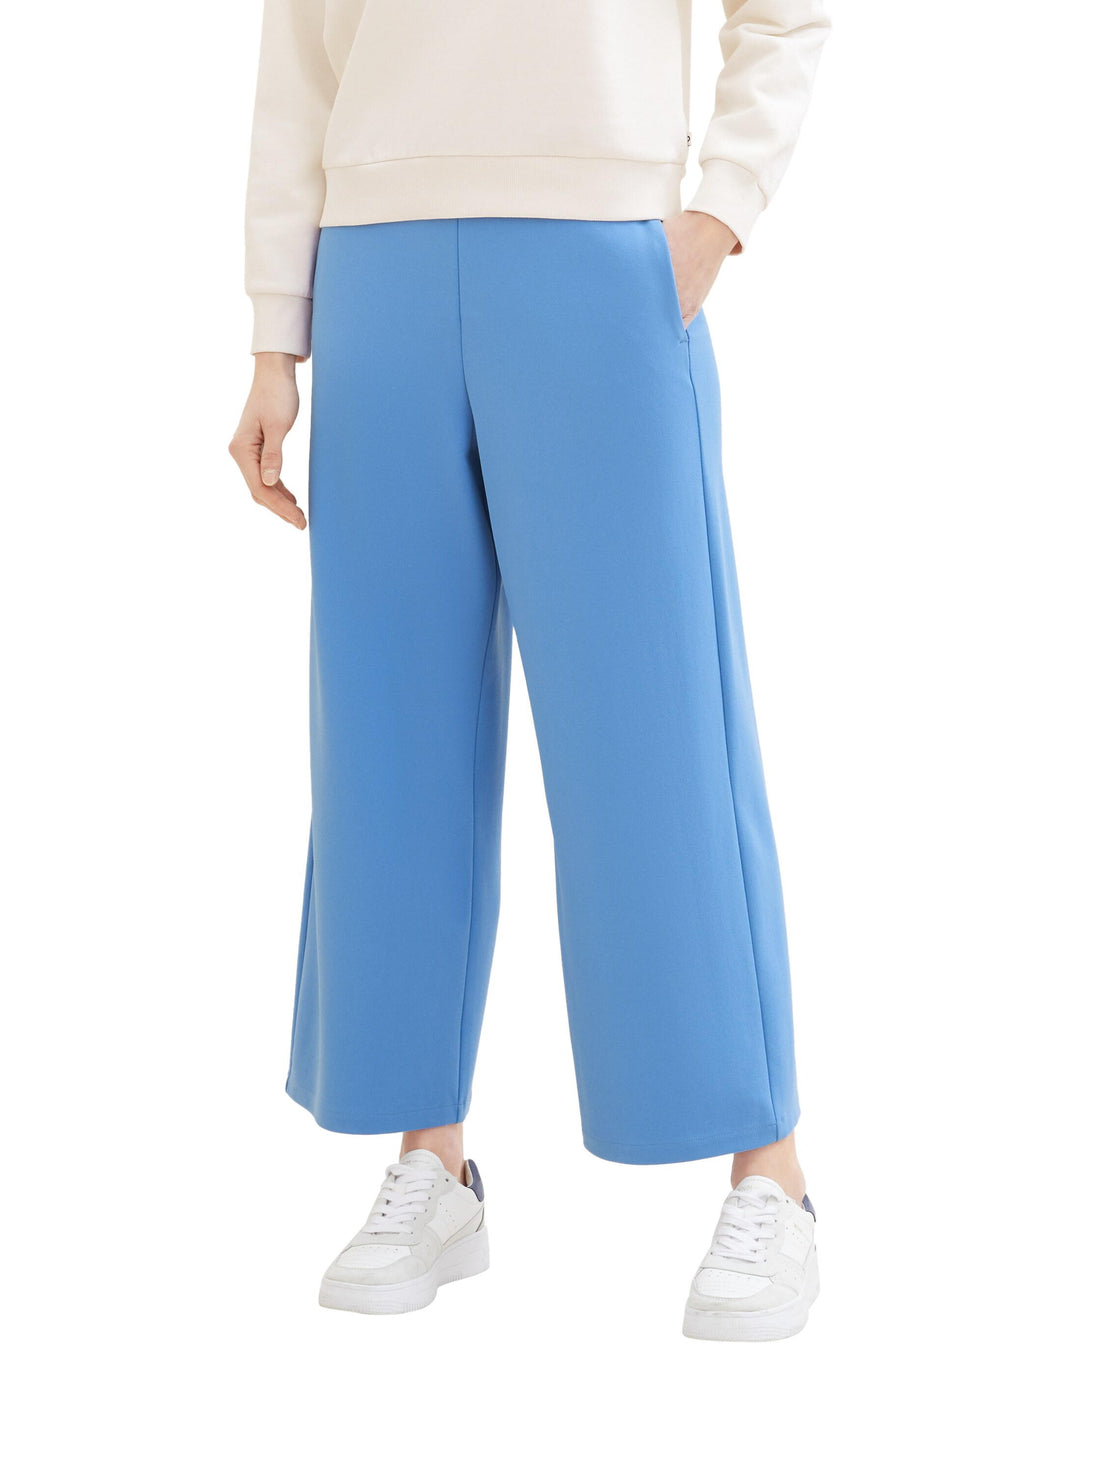 Cropped Slip On Trousers_1042304_18712_01